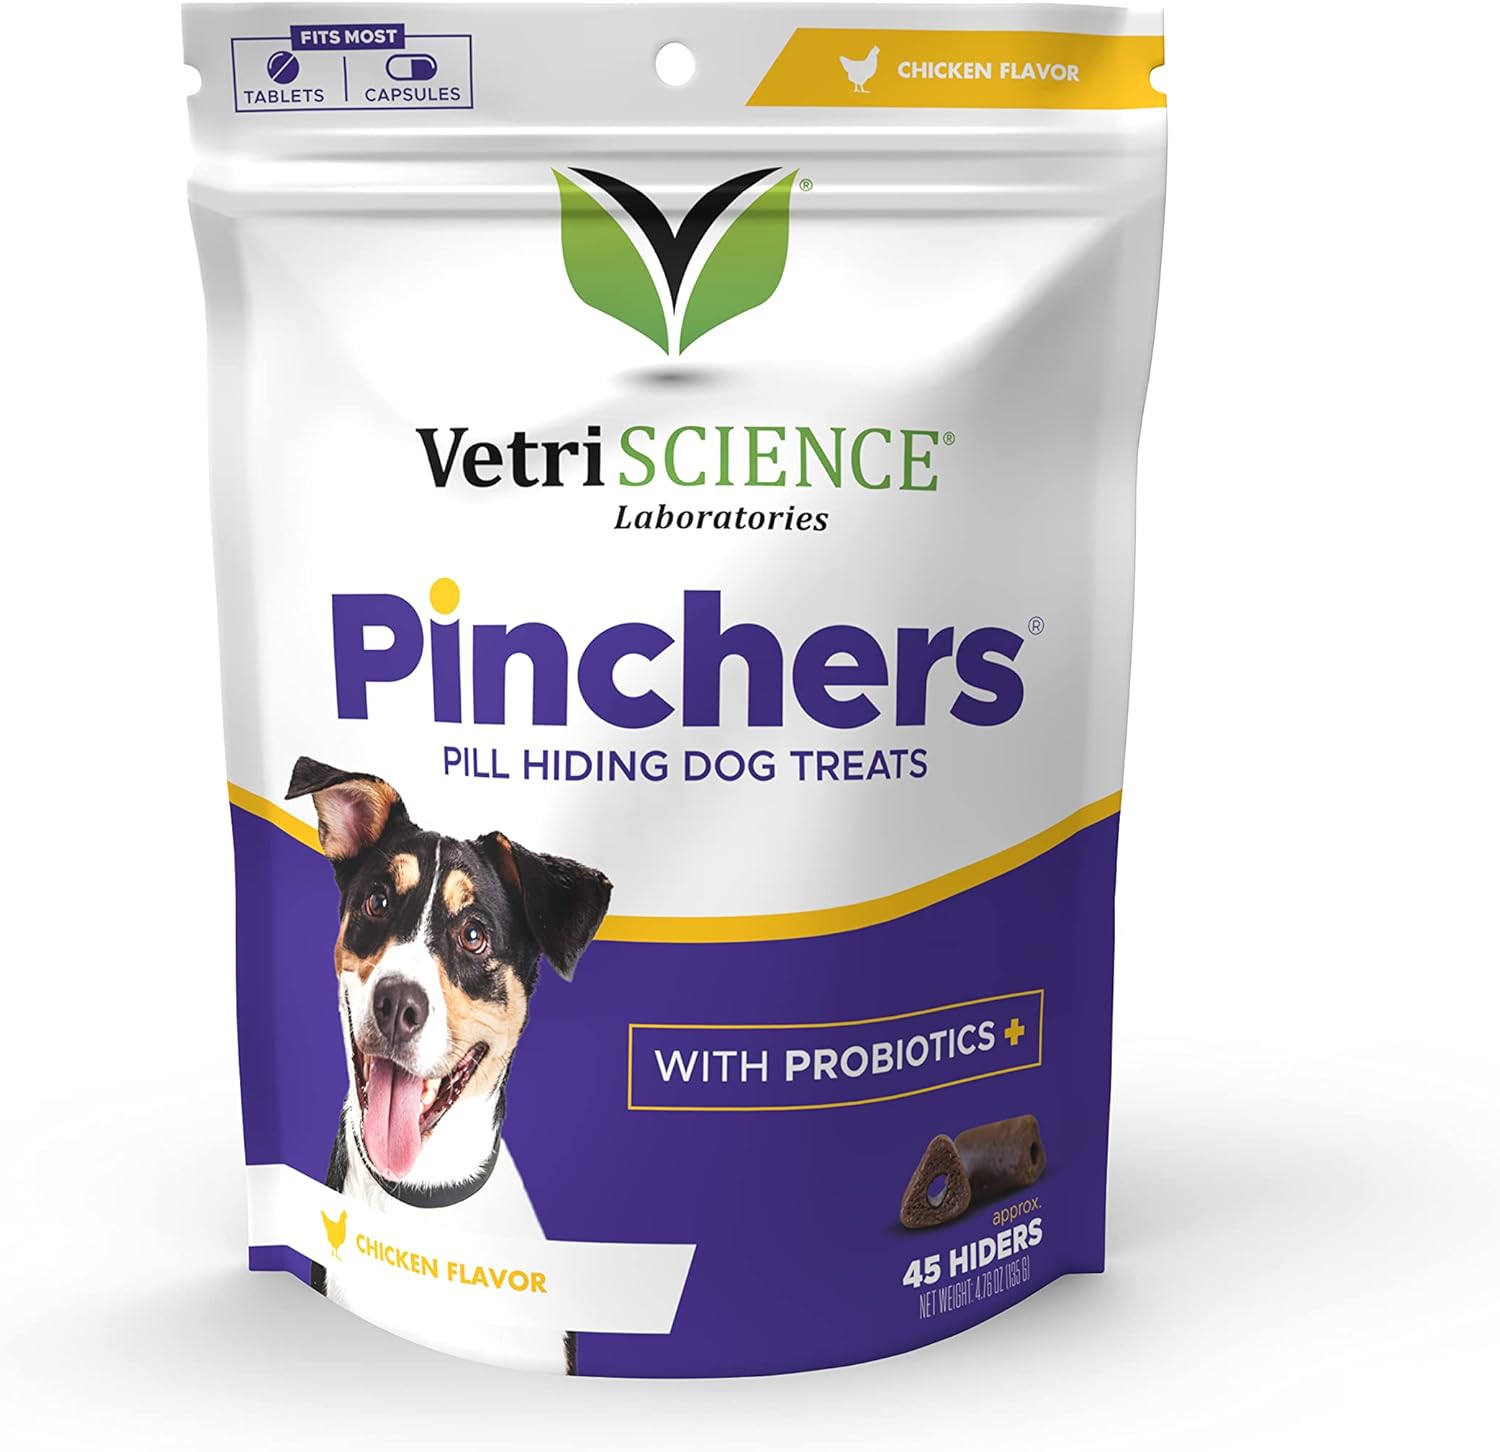 VETRISCIENCE Pinchers Pill Hiding Dog Treats with Probiotics - Wrap Pills, Capsules and Tablets - Makes Giving Medication Easy